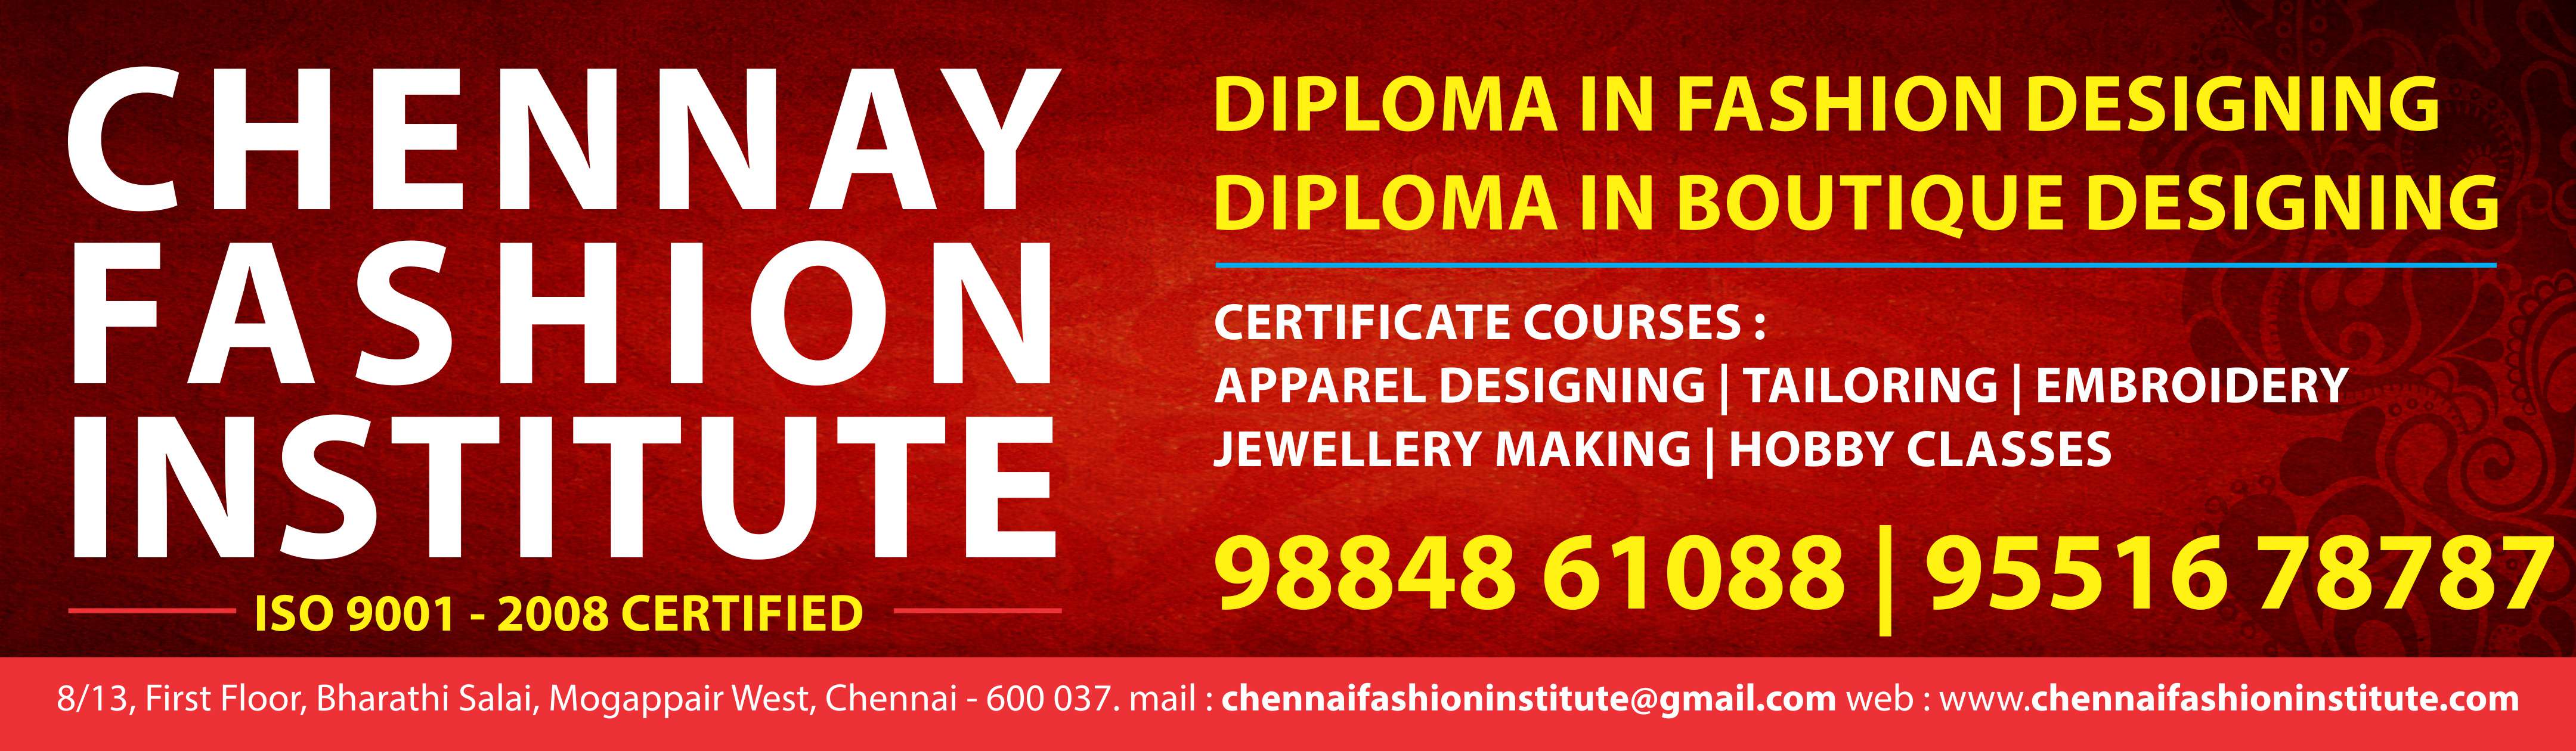 Want to learn fashion designing ?. Call +91 98848 61088. You will reach the best Fashion School.